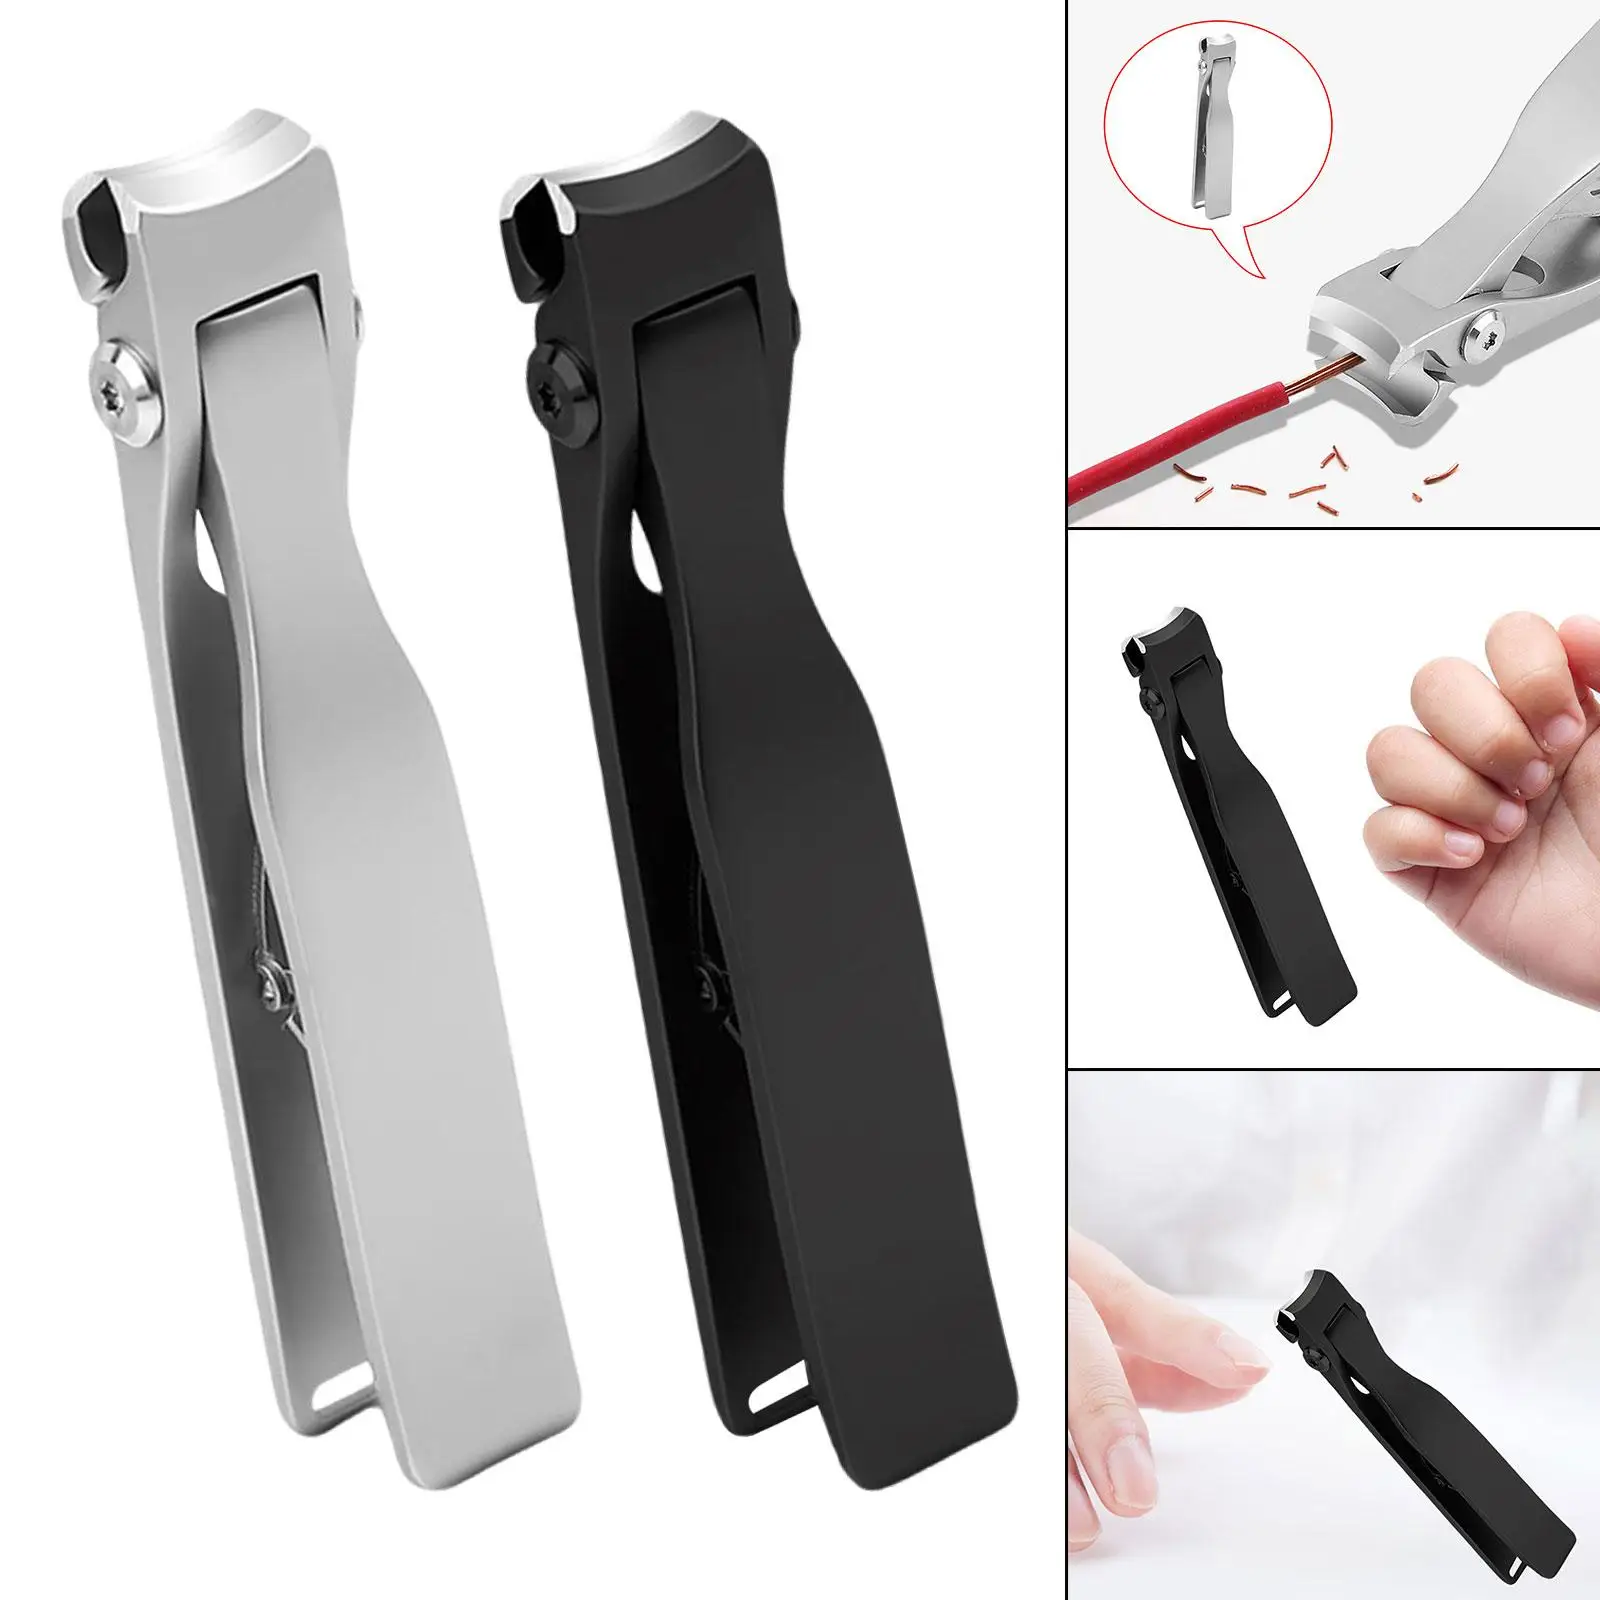 Toe Nail Clippers Nail Trimmer Premium Wide Opening Anti Slip Comfort Grip Fingernail and Toenail Clipper for Thick Toenails